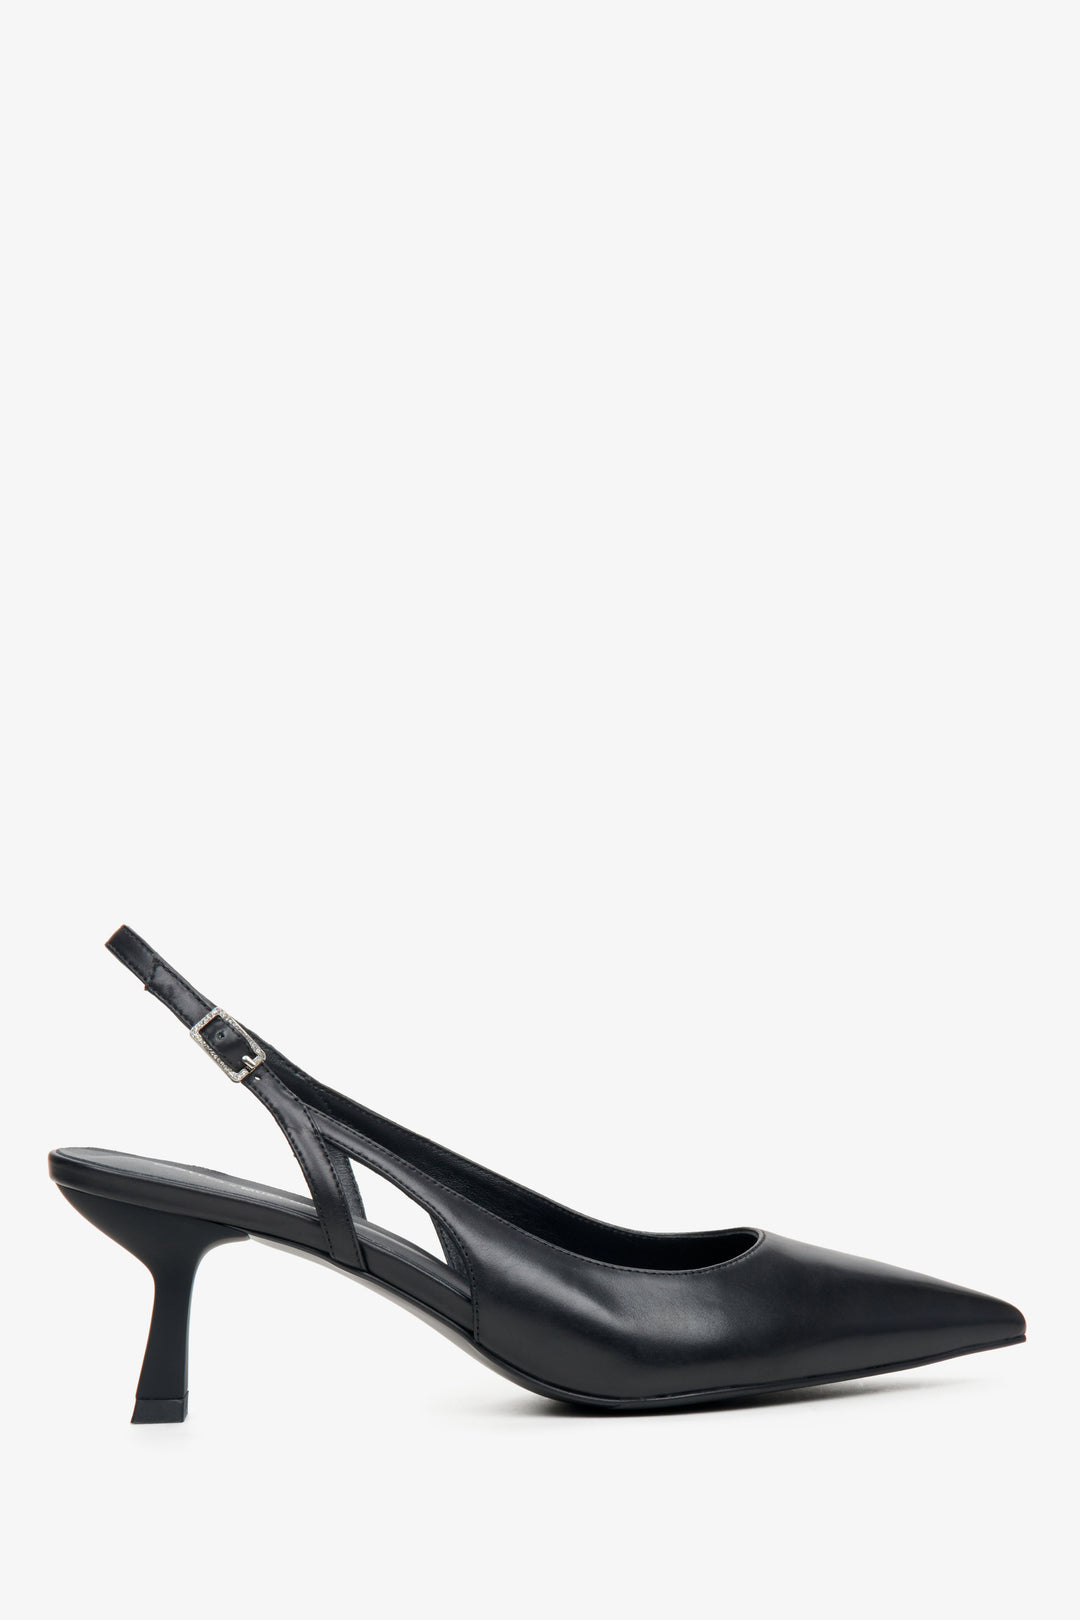 Estro X MustHave black leather slingback pumps - side profile of the shoe.